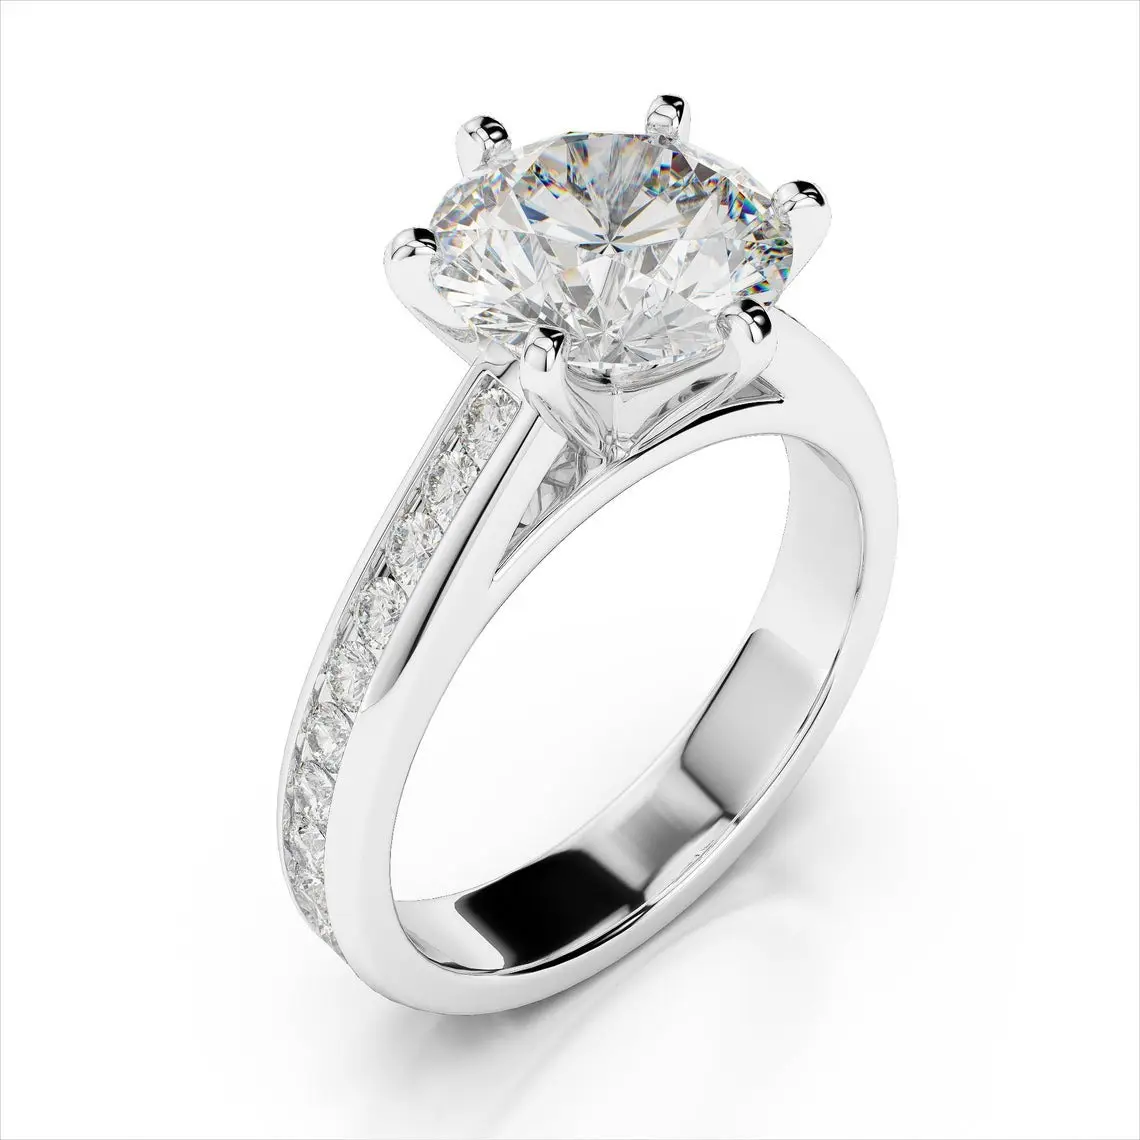 Sheetal Impex 3.00 Ctw I Clarity GH Color Round Shape Real Natural Diamonds Studded 14 Kt White Gold Engagement Ring